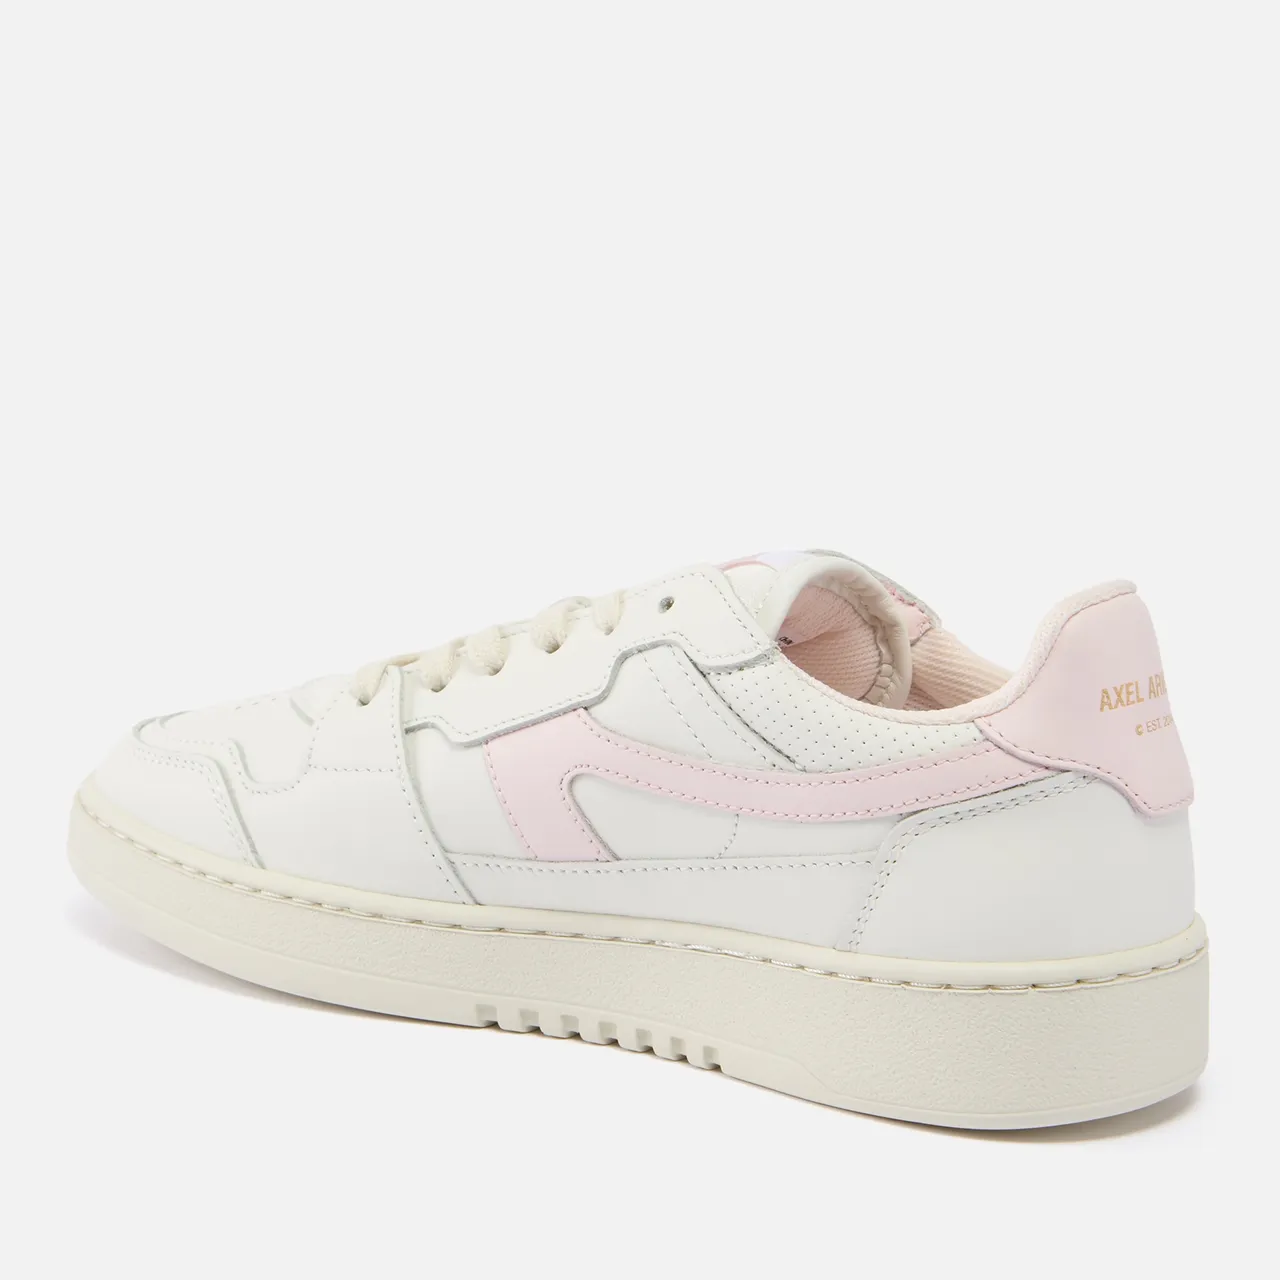 Axel Arigato Women's Dice A Leather Trainers - UK